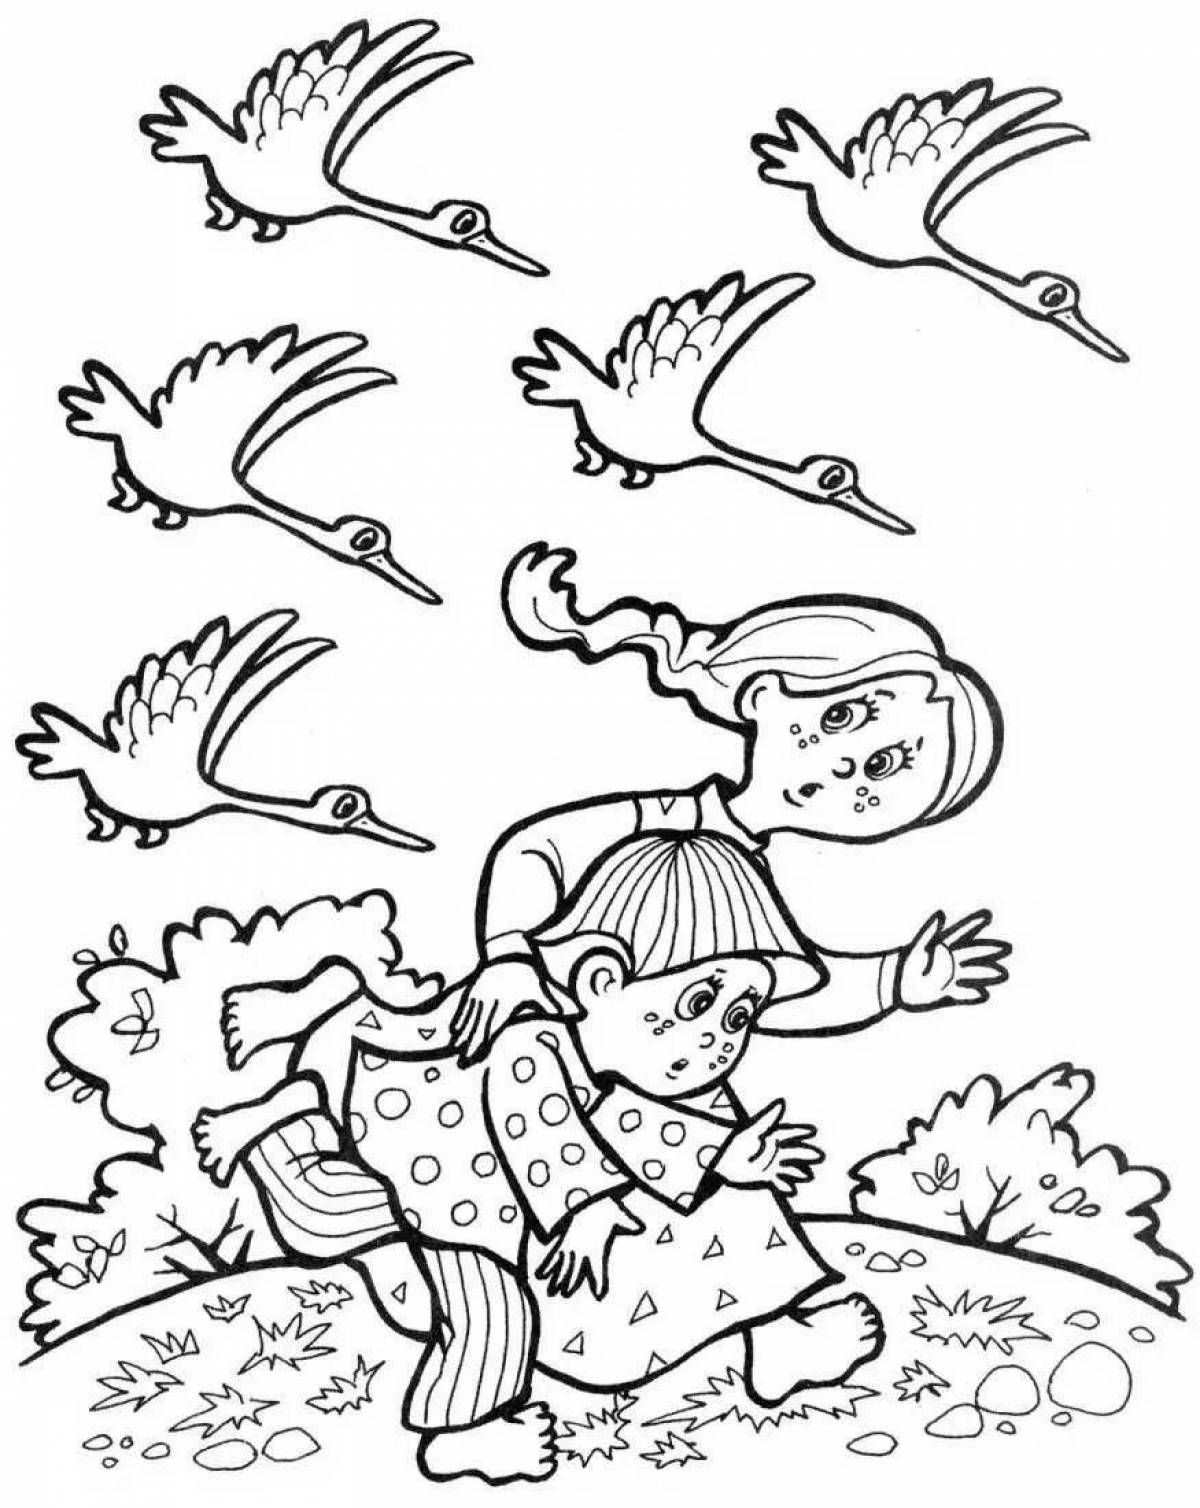 Coloring book dreamy fairy tale geese swans